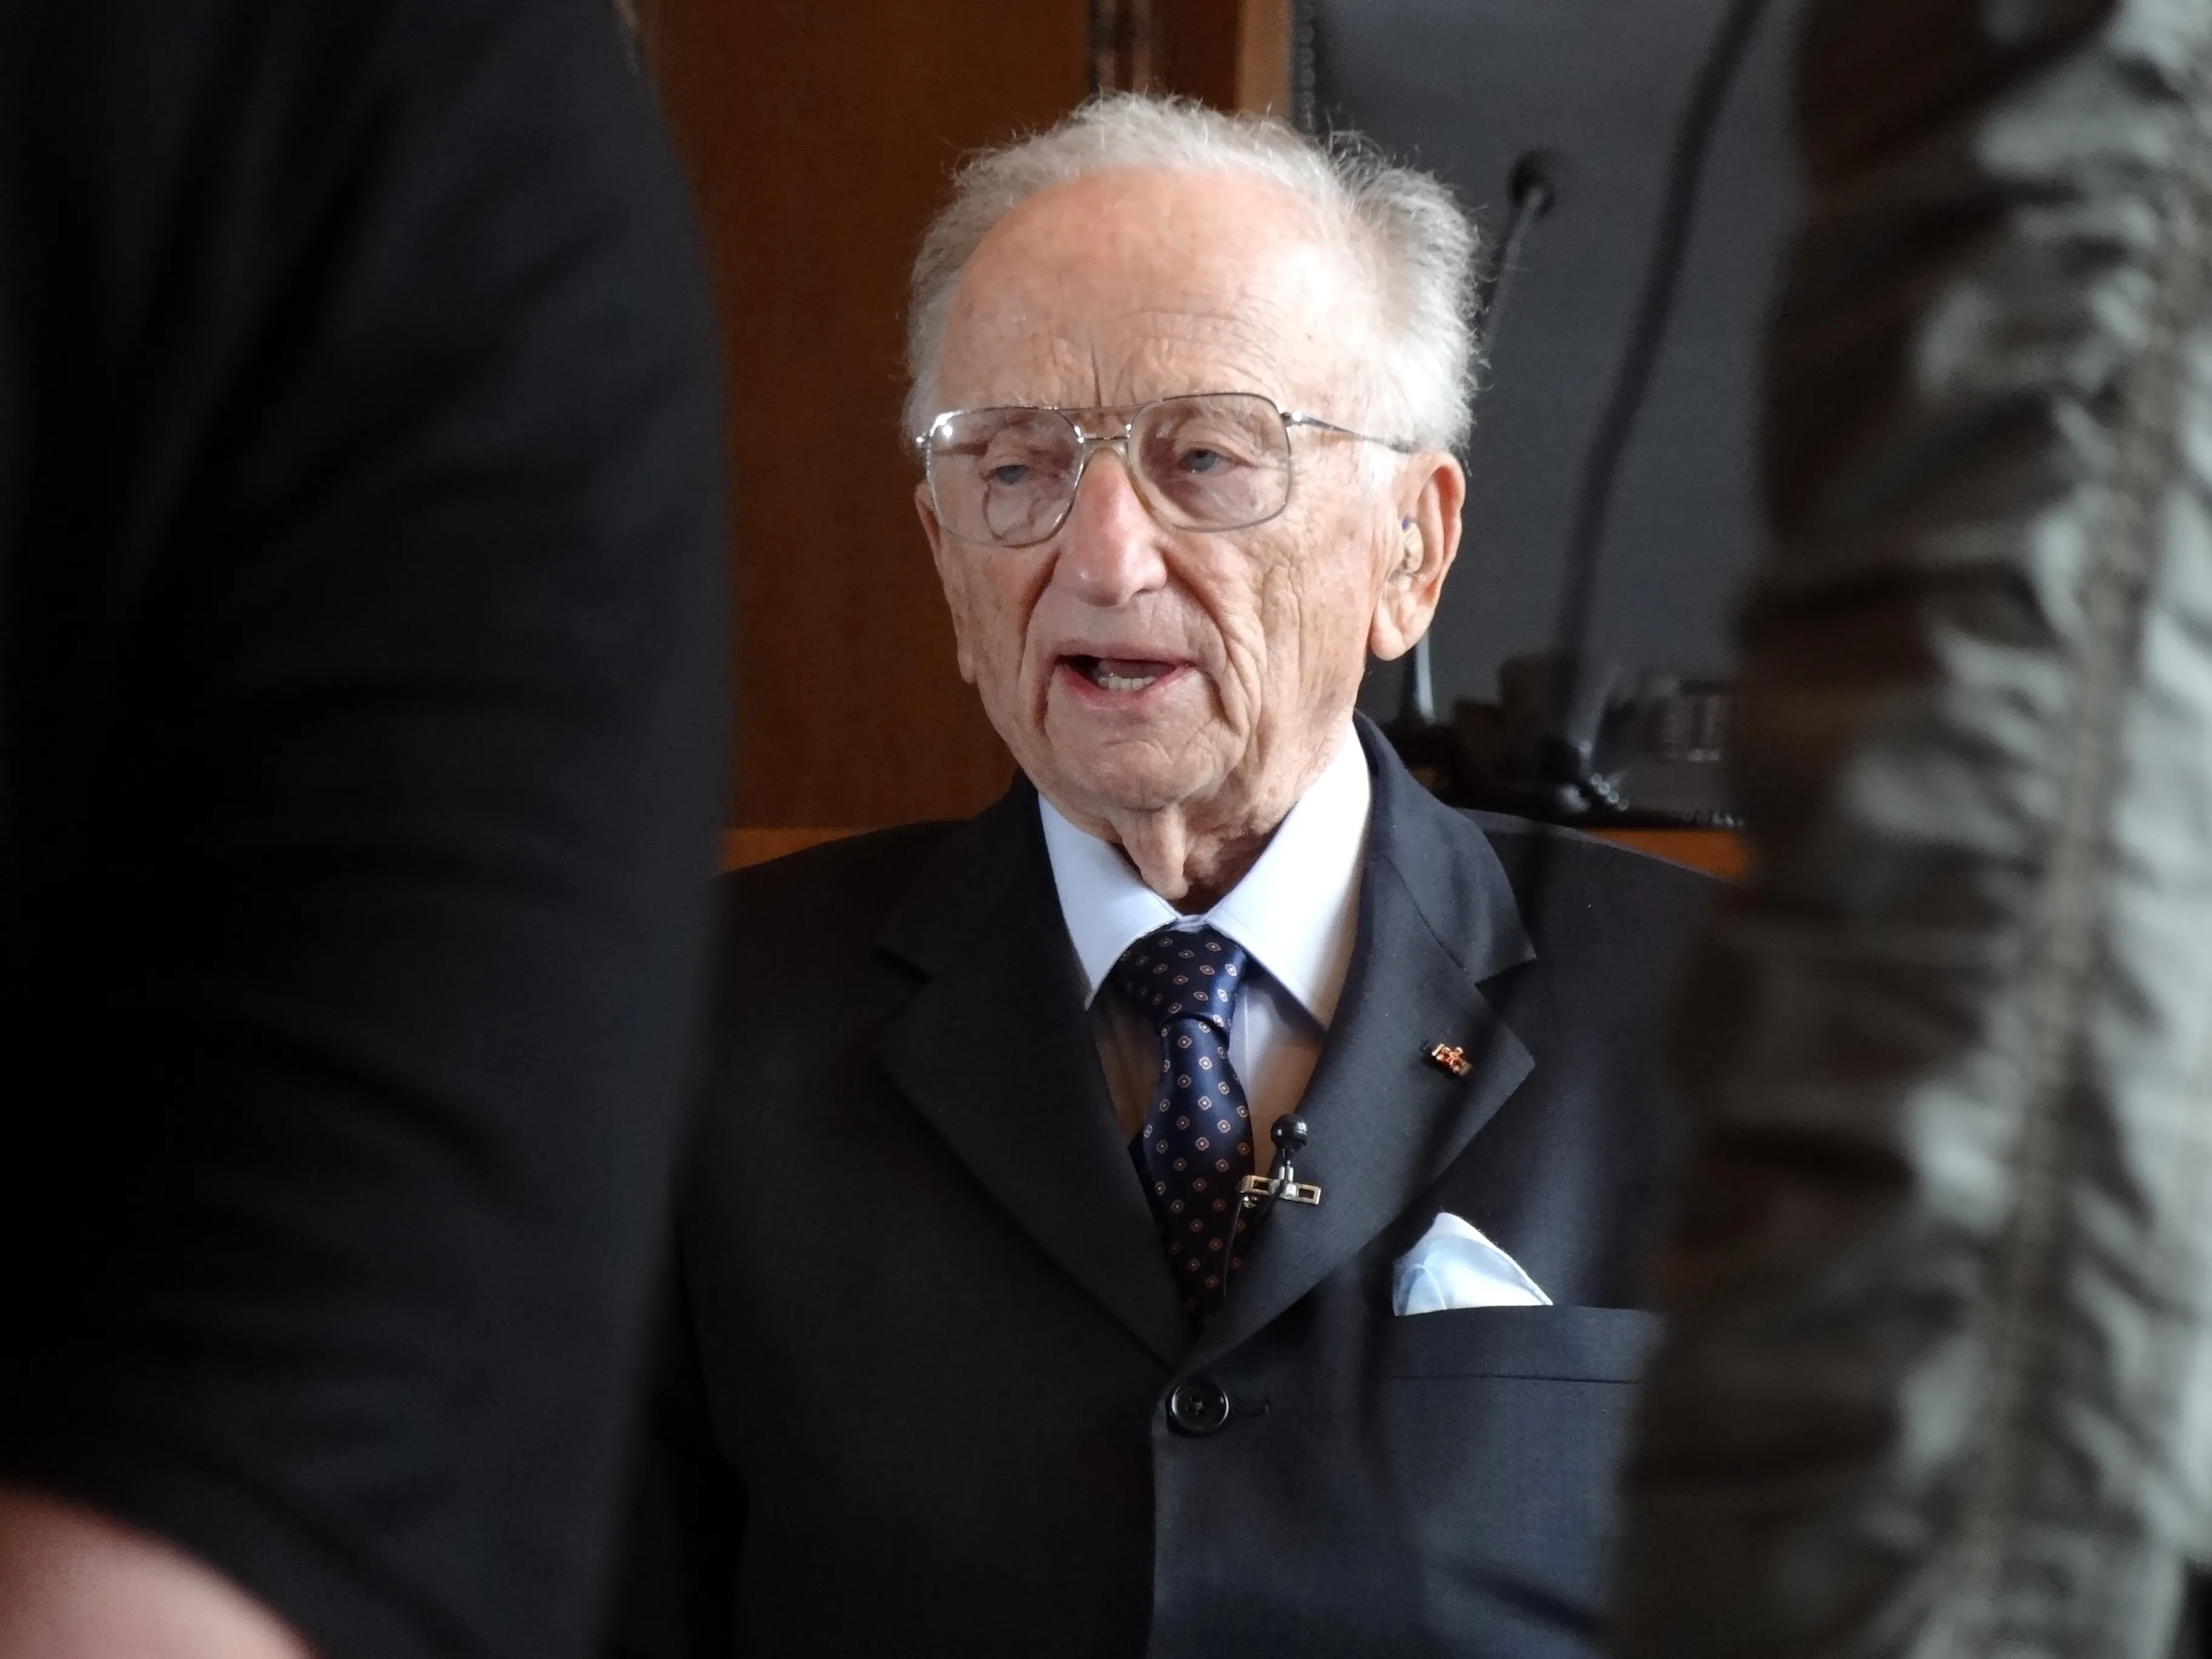 At the age of 27, Ben Ferencz was assigned to prosecute the Einsatzgruppen (mobile killing units) trial, in which 22 former commanders were charged with war crimes and crimes against humanity.?w=200&h=150